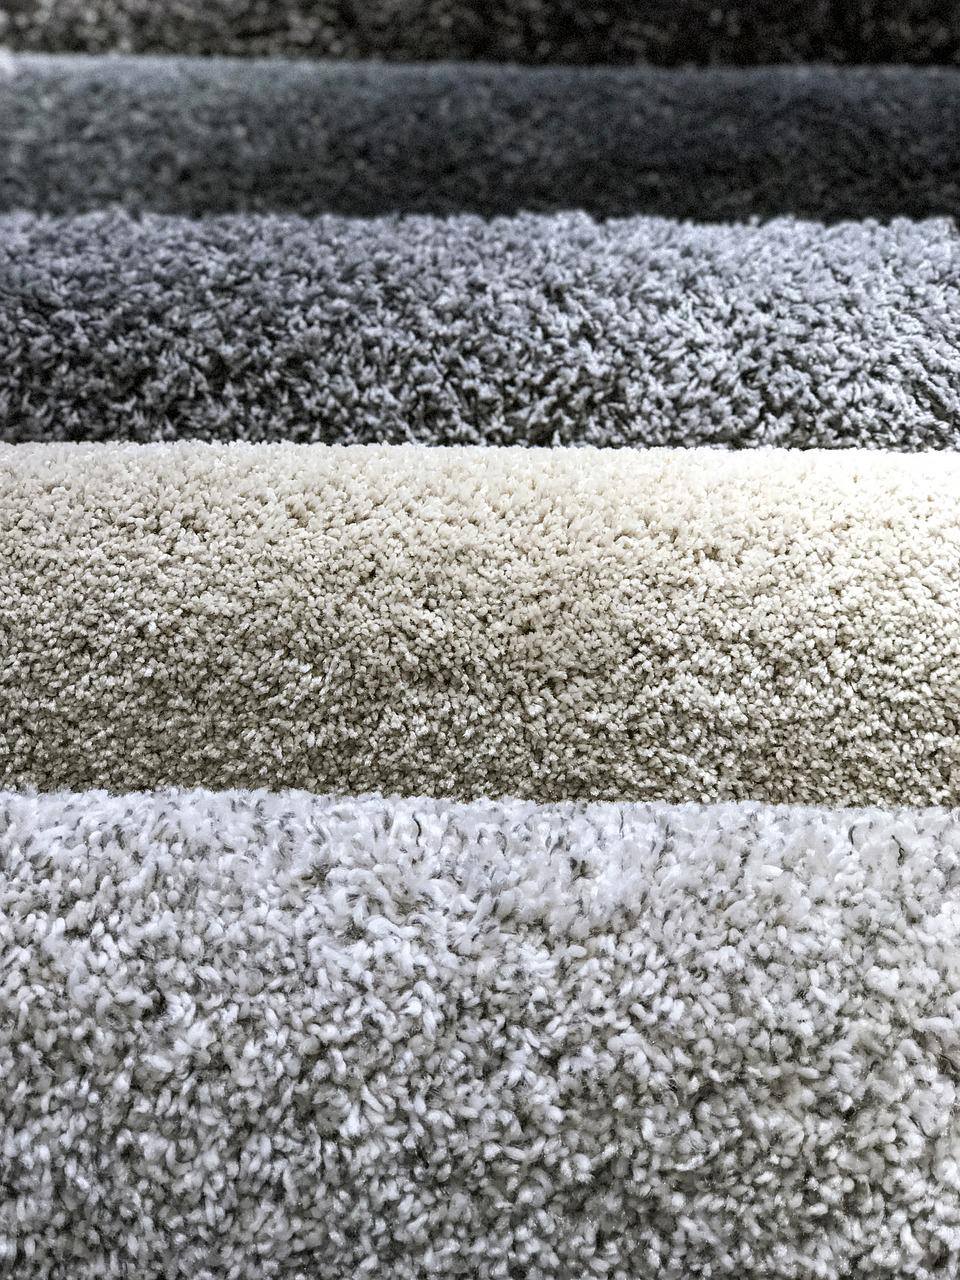 This image shows new carpeting in a variety of colors.